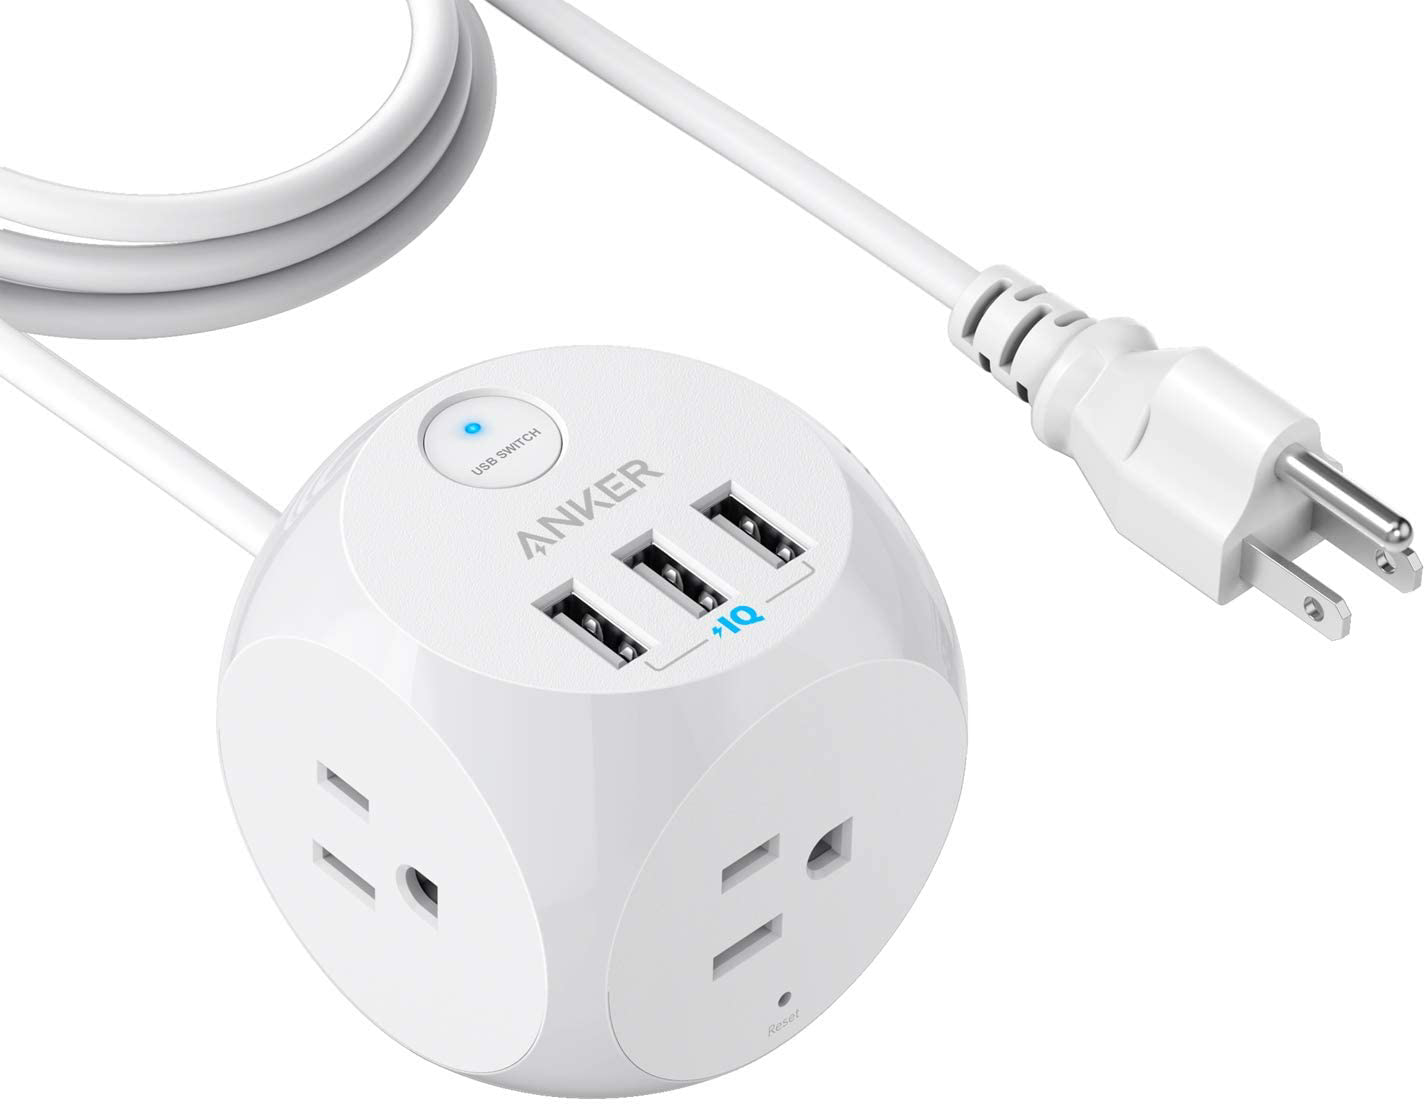 Amazon.com: Anker Power Strip with USB, 5 ft Extension Cord, PowerPort Cube USB with 3 Outlets and 3 USB Ports, Portable Design $15.19